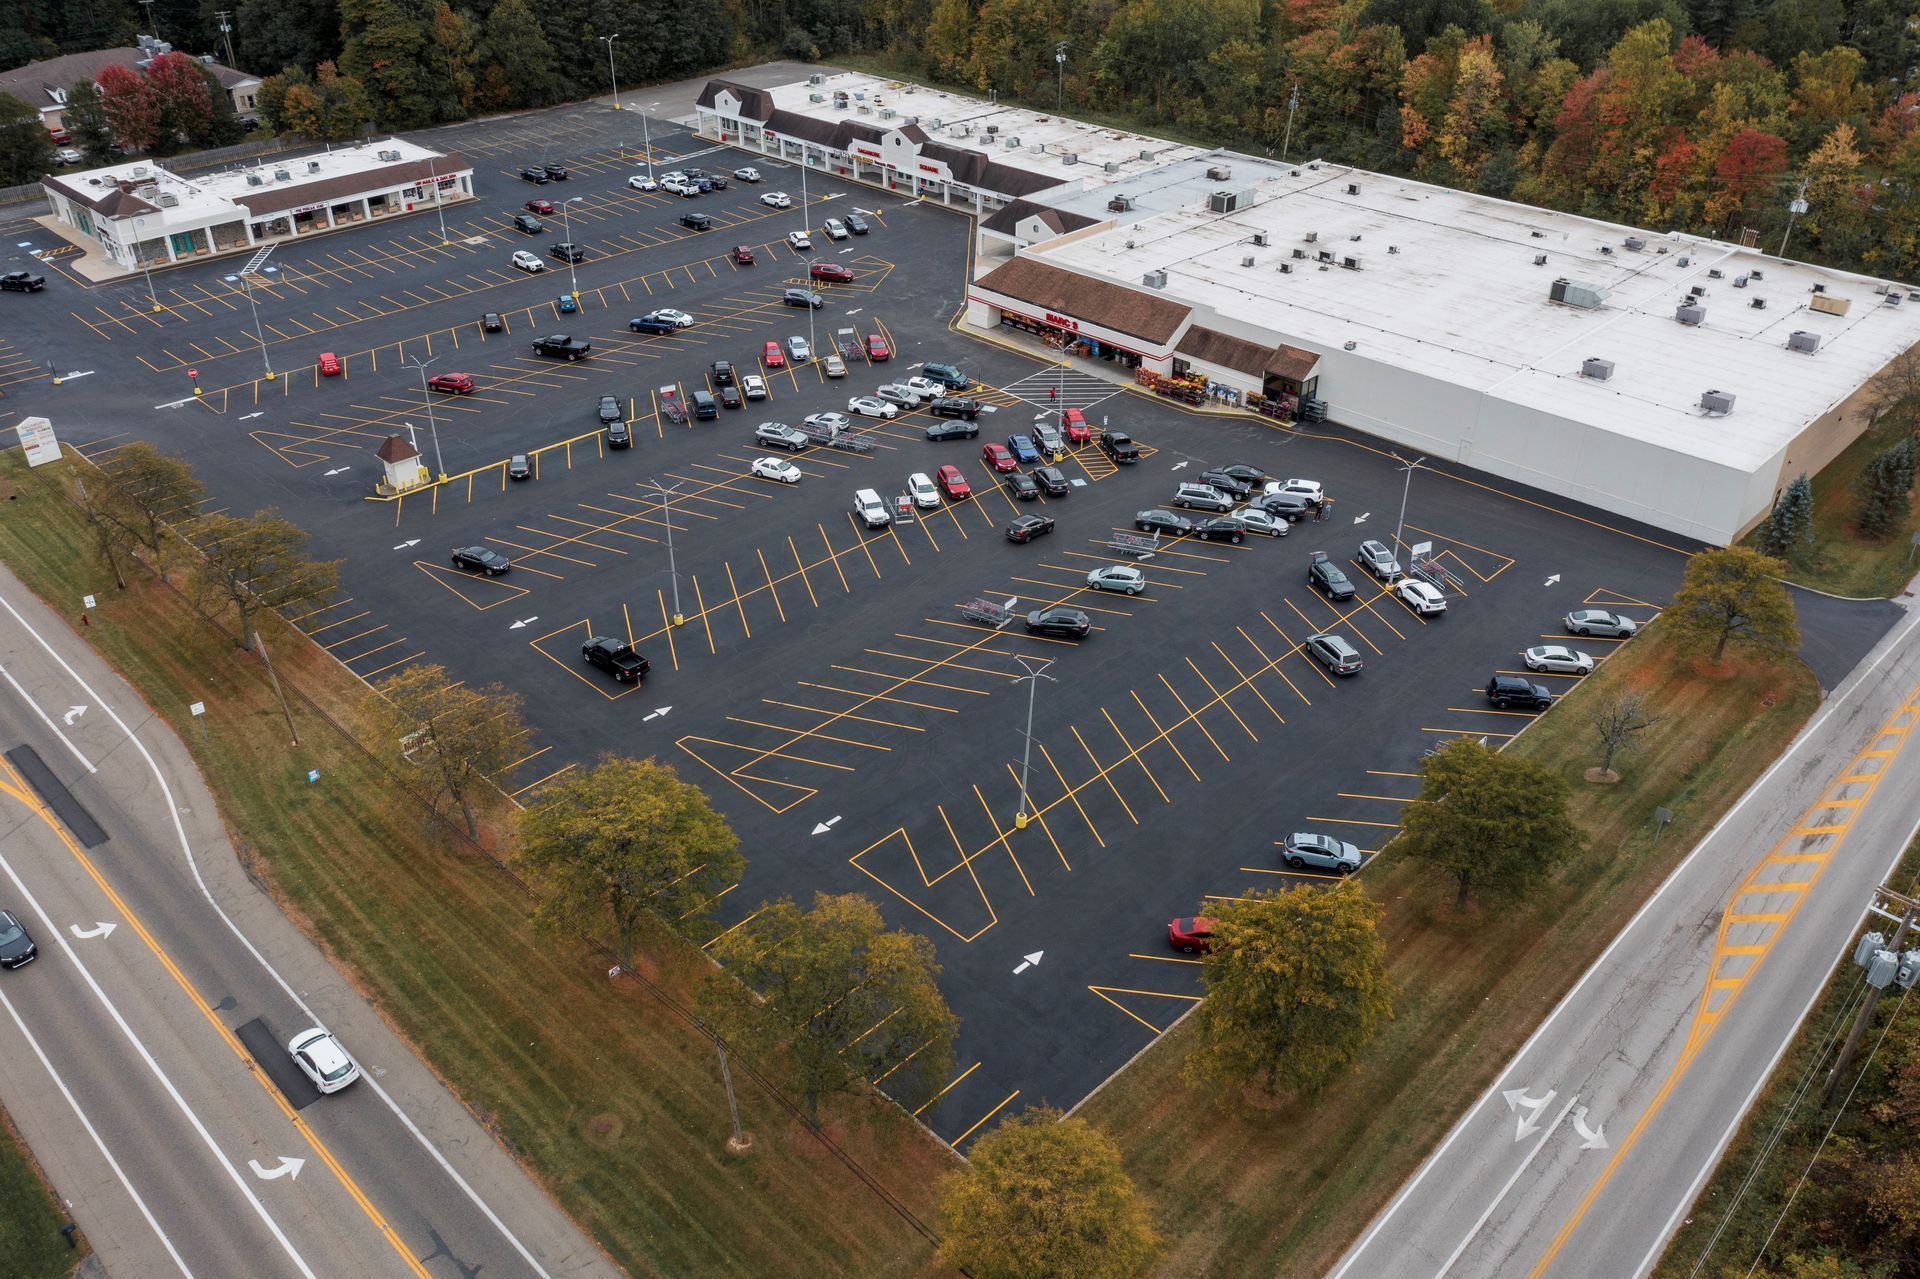 An aerial view of a parking lot with a large building in the background.